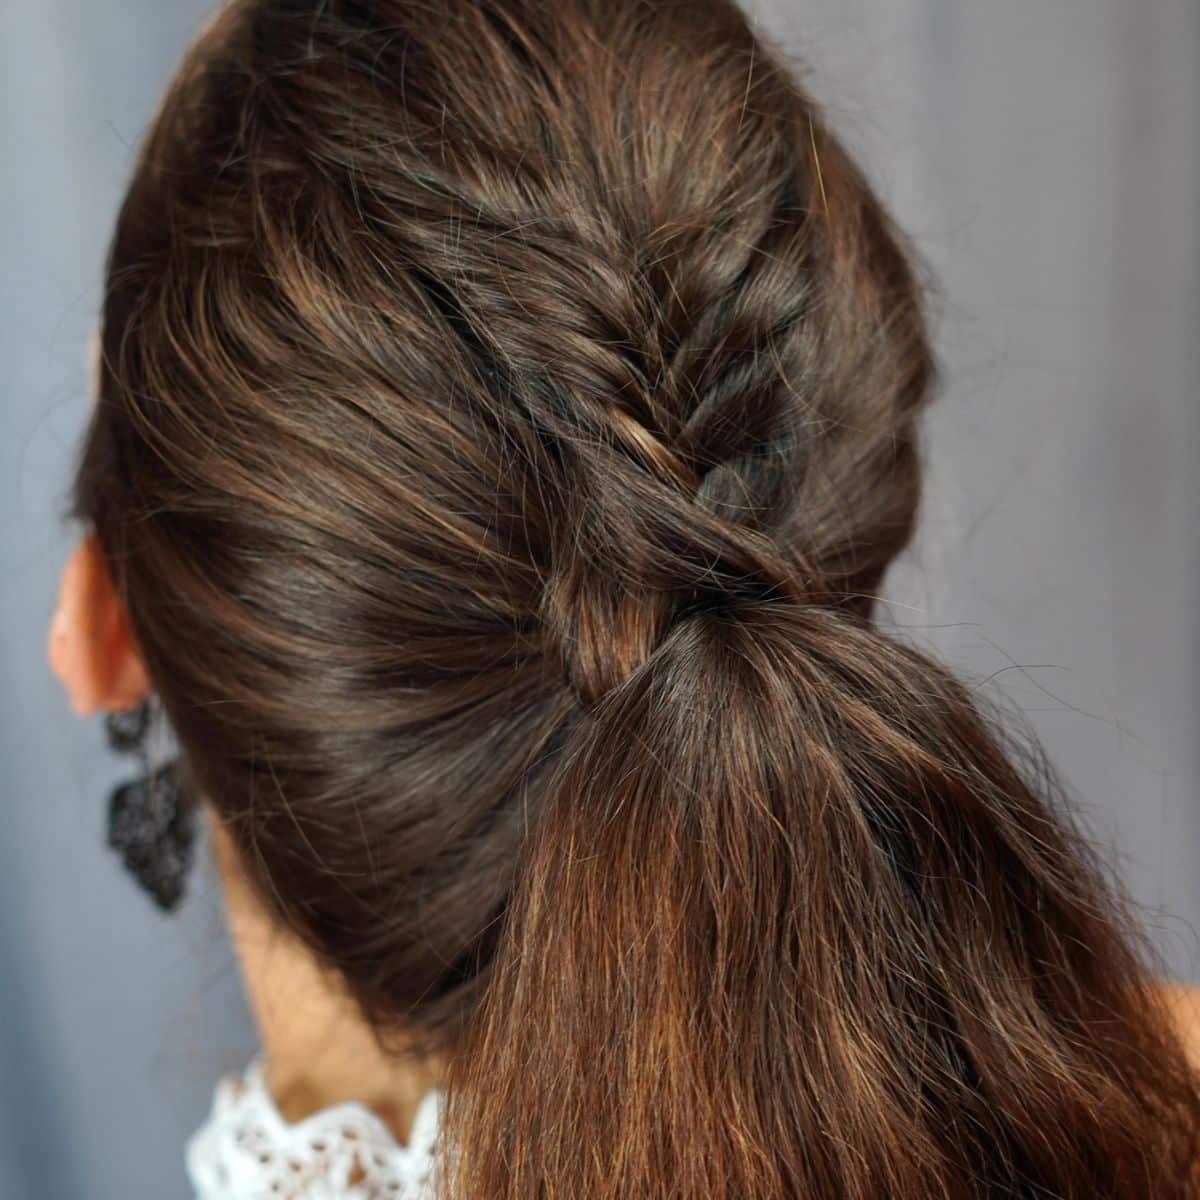 53 Best Ponytail Hairstyles { Low and High Ponytails } To Inspire ,  hairstyles #weddinghair #ponytails #wedding #hairstyles #ponytail  #weddinghairstyles Prom hairstyle, easy ponytails, puff ponytails - Fabmood  | Wedding Colors, Wedding Themes, Wedding ...